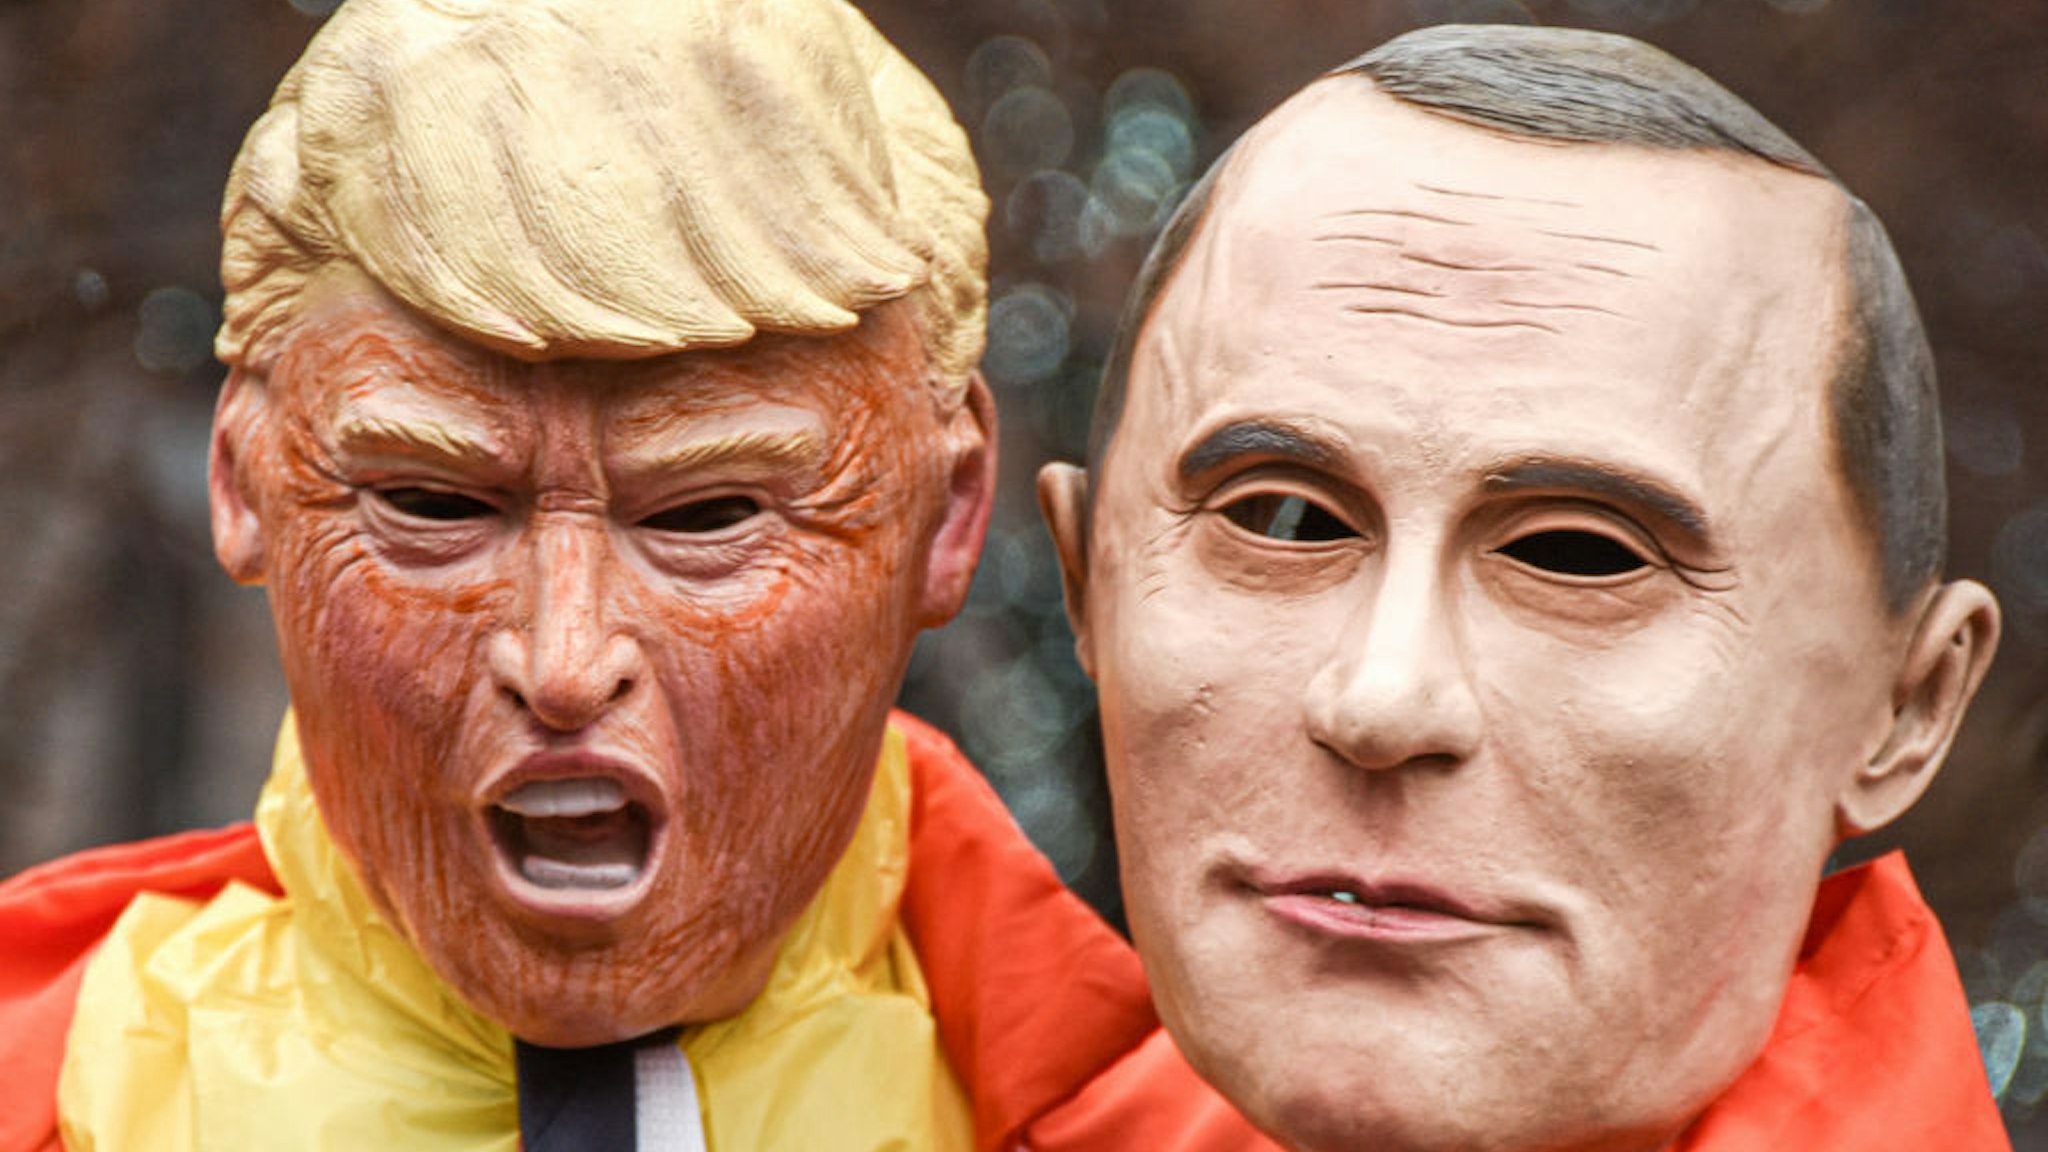 A protester dressed as the United States President Donald Trump holds a mask of Russian President Vladimir Putin during the march. Women's March is an annual event that is held across the United States every year to honour women's rights. There were marches in many cities across our country this afternoon, and they were attended by women's rights activists, politicians, and citizens, alike. (Photo by Whitney Saleski/SOPA Images/LightRocket via Getty Images)